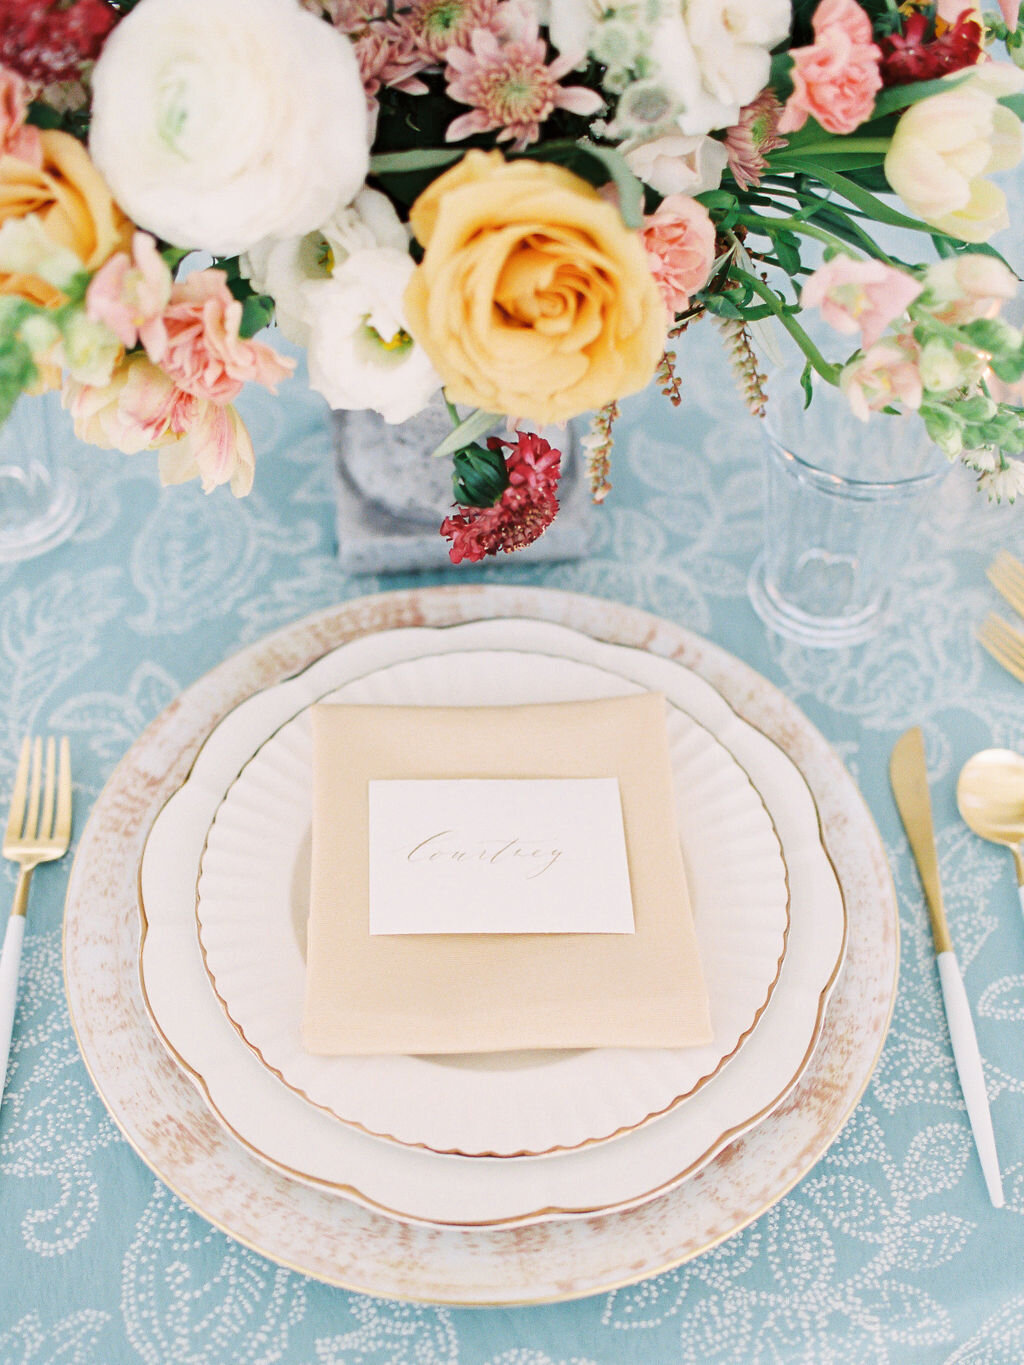 Place setting with a yellow napkin and place card on a light blue linen